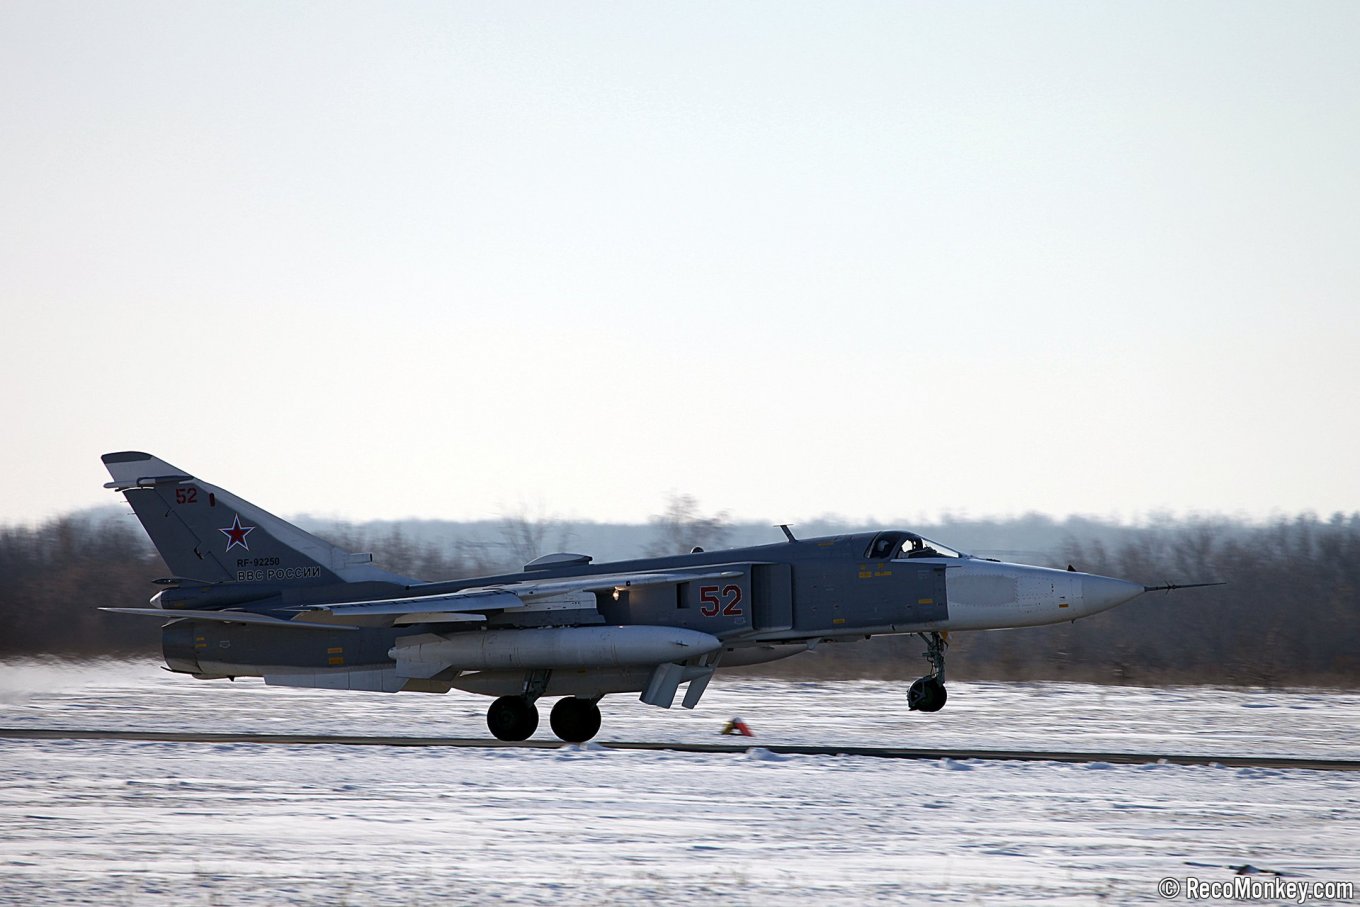 Russia Use Su-24MR Reconnaissance Aircraft In Border Areas to Spy on the Armed Forces of Ukraine, Defense Express, war in Ukraine, Russian-Ukrainian war